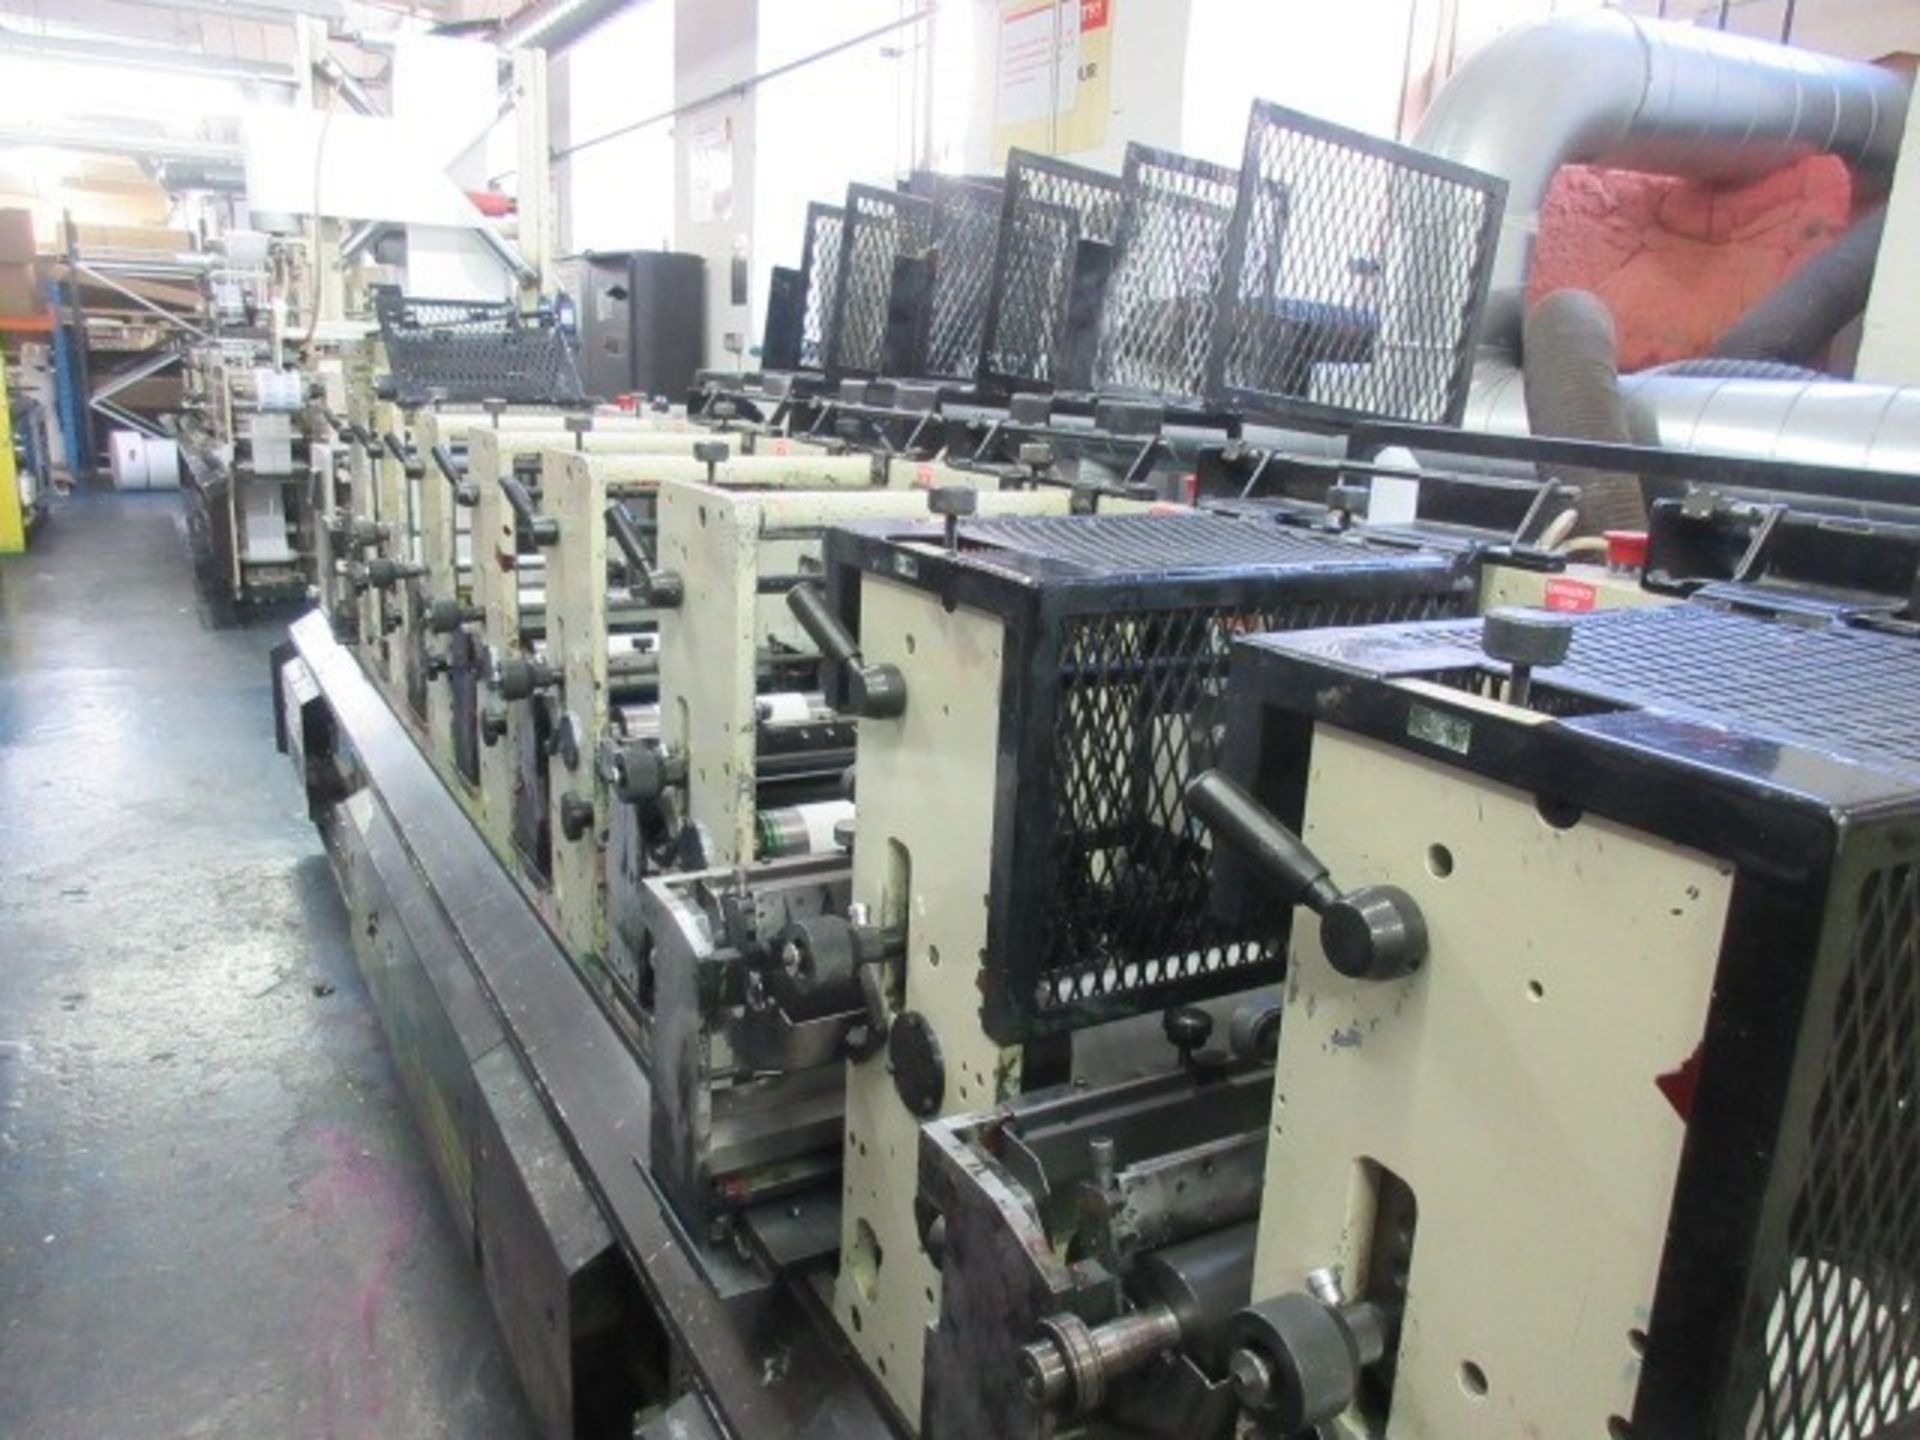 Mark Andy 2200-10F 10” 8 colour flexographic label printing press. Serial no: 1260086 (2002) - Image 350 of 383